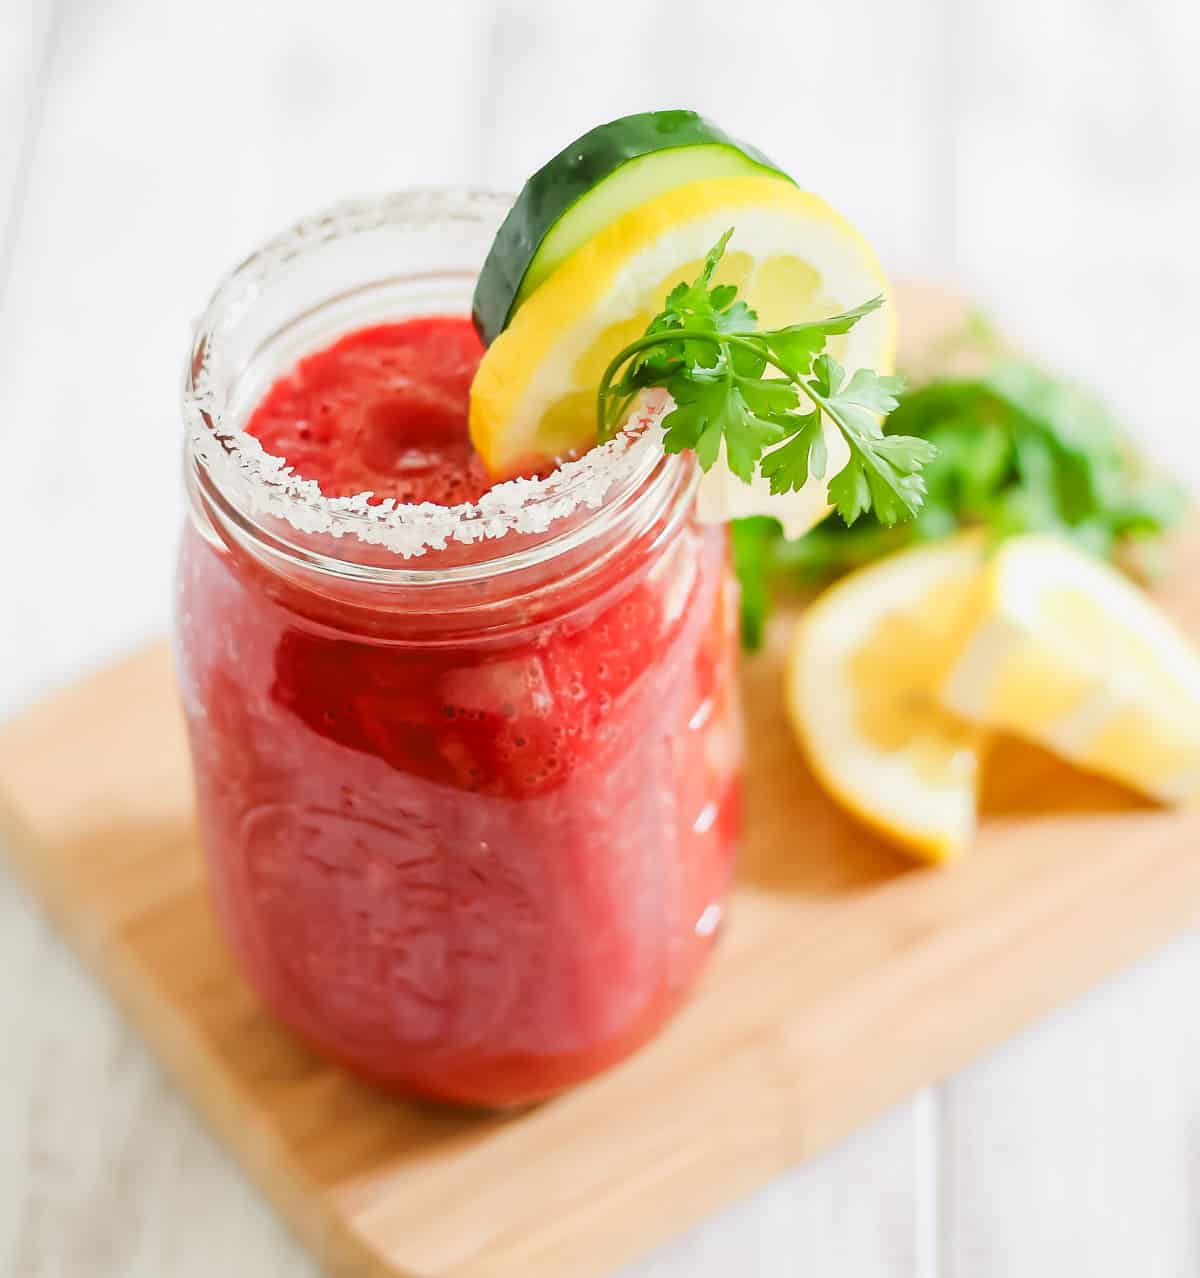 A mason jar filled with homemade V8 juice garnished with a salt rim and a slice of lemon and cucumber.